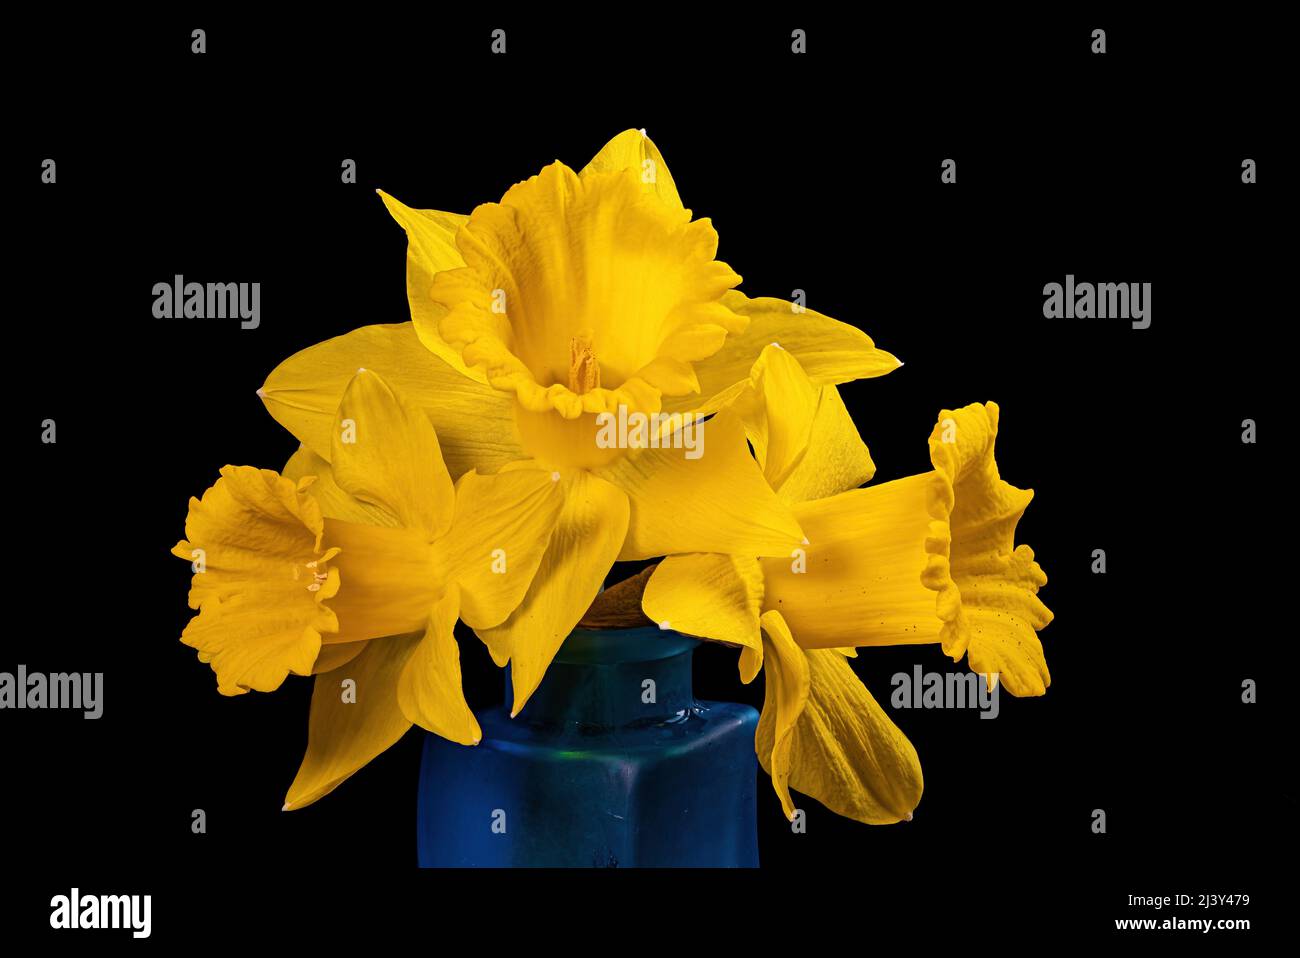 Yellow colored Narcissus or daffodil against a black background. It is a genus of spring flowering perennial plants of the amaryllis family, Amaryllid Stock Photo